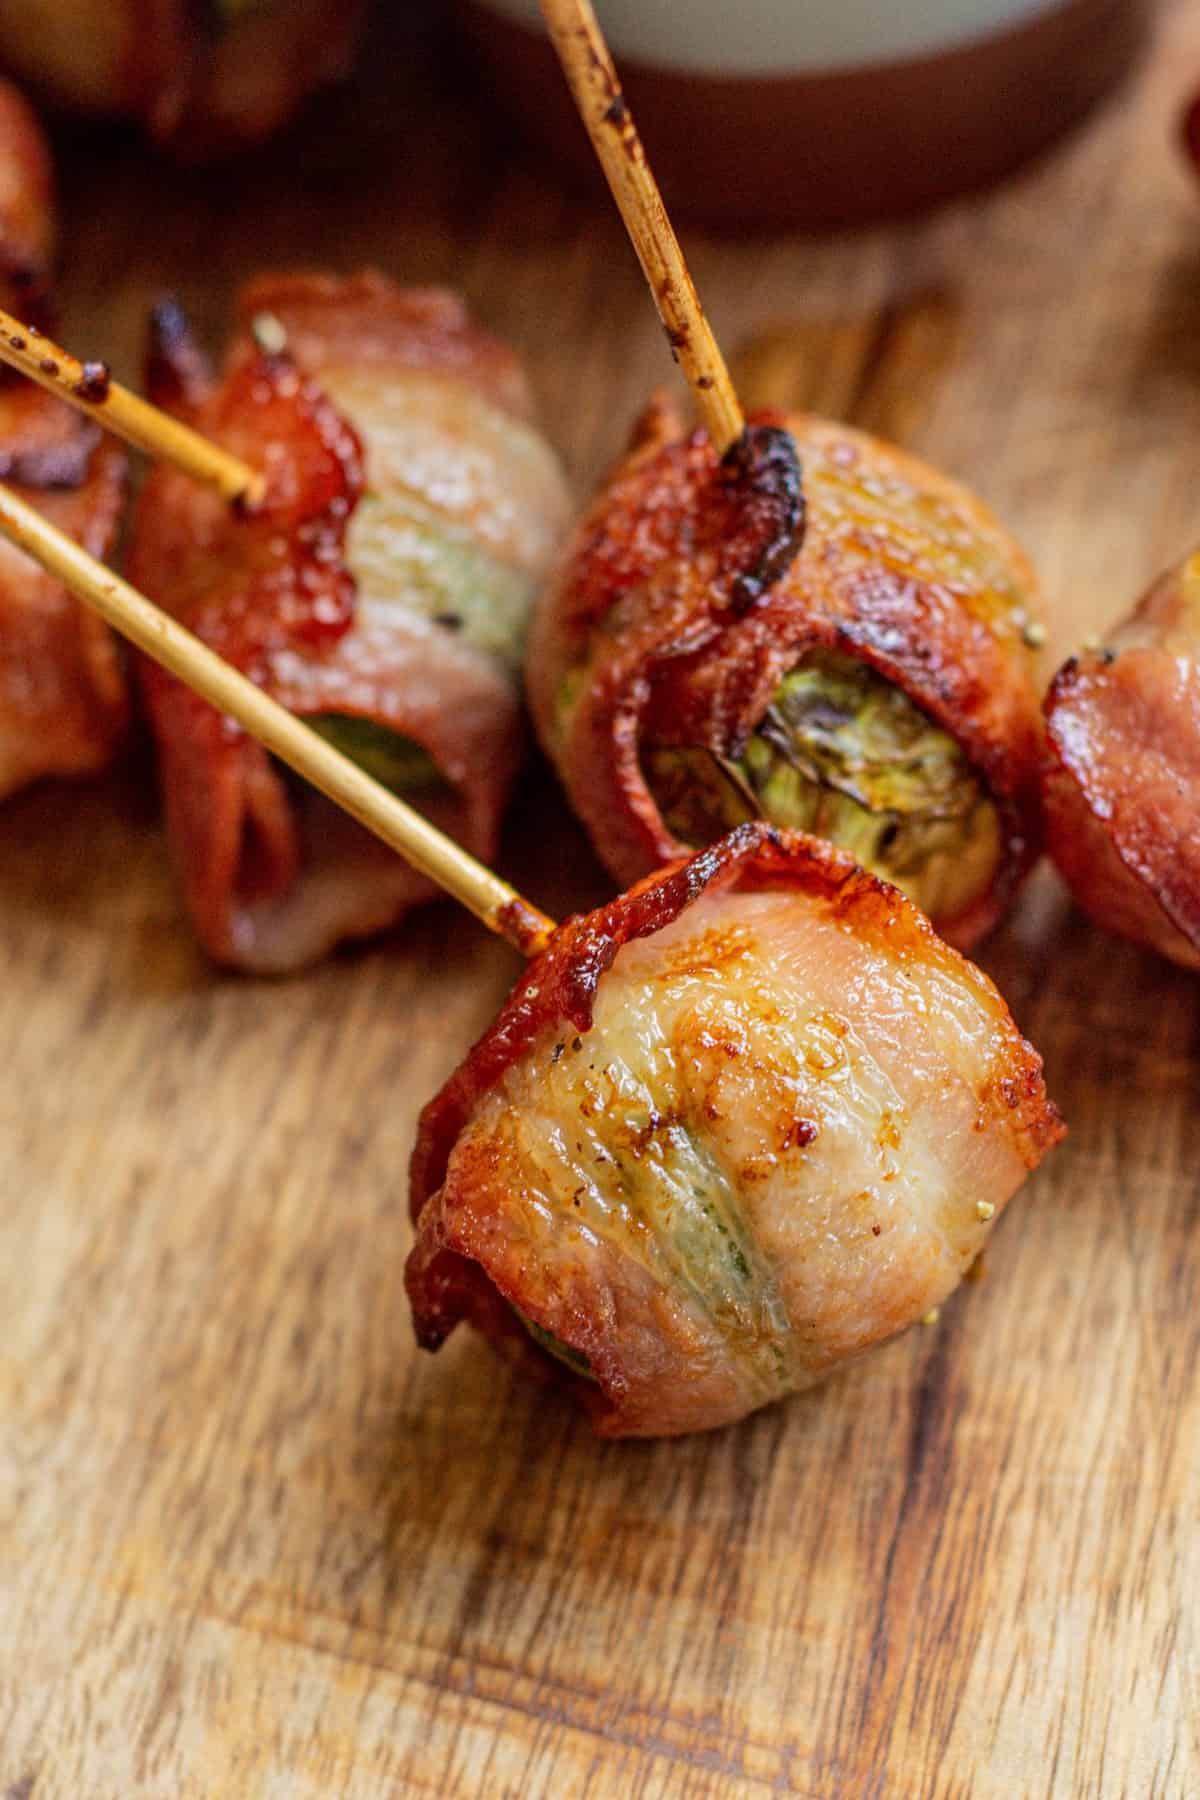 a bacon wrapped Brussel sprout on its side.